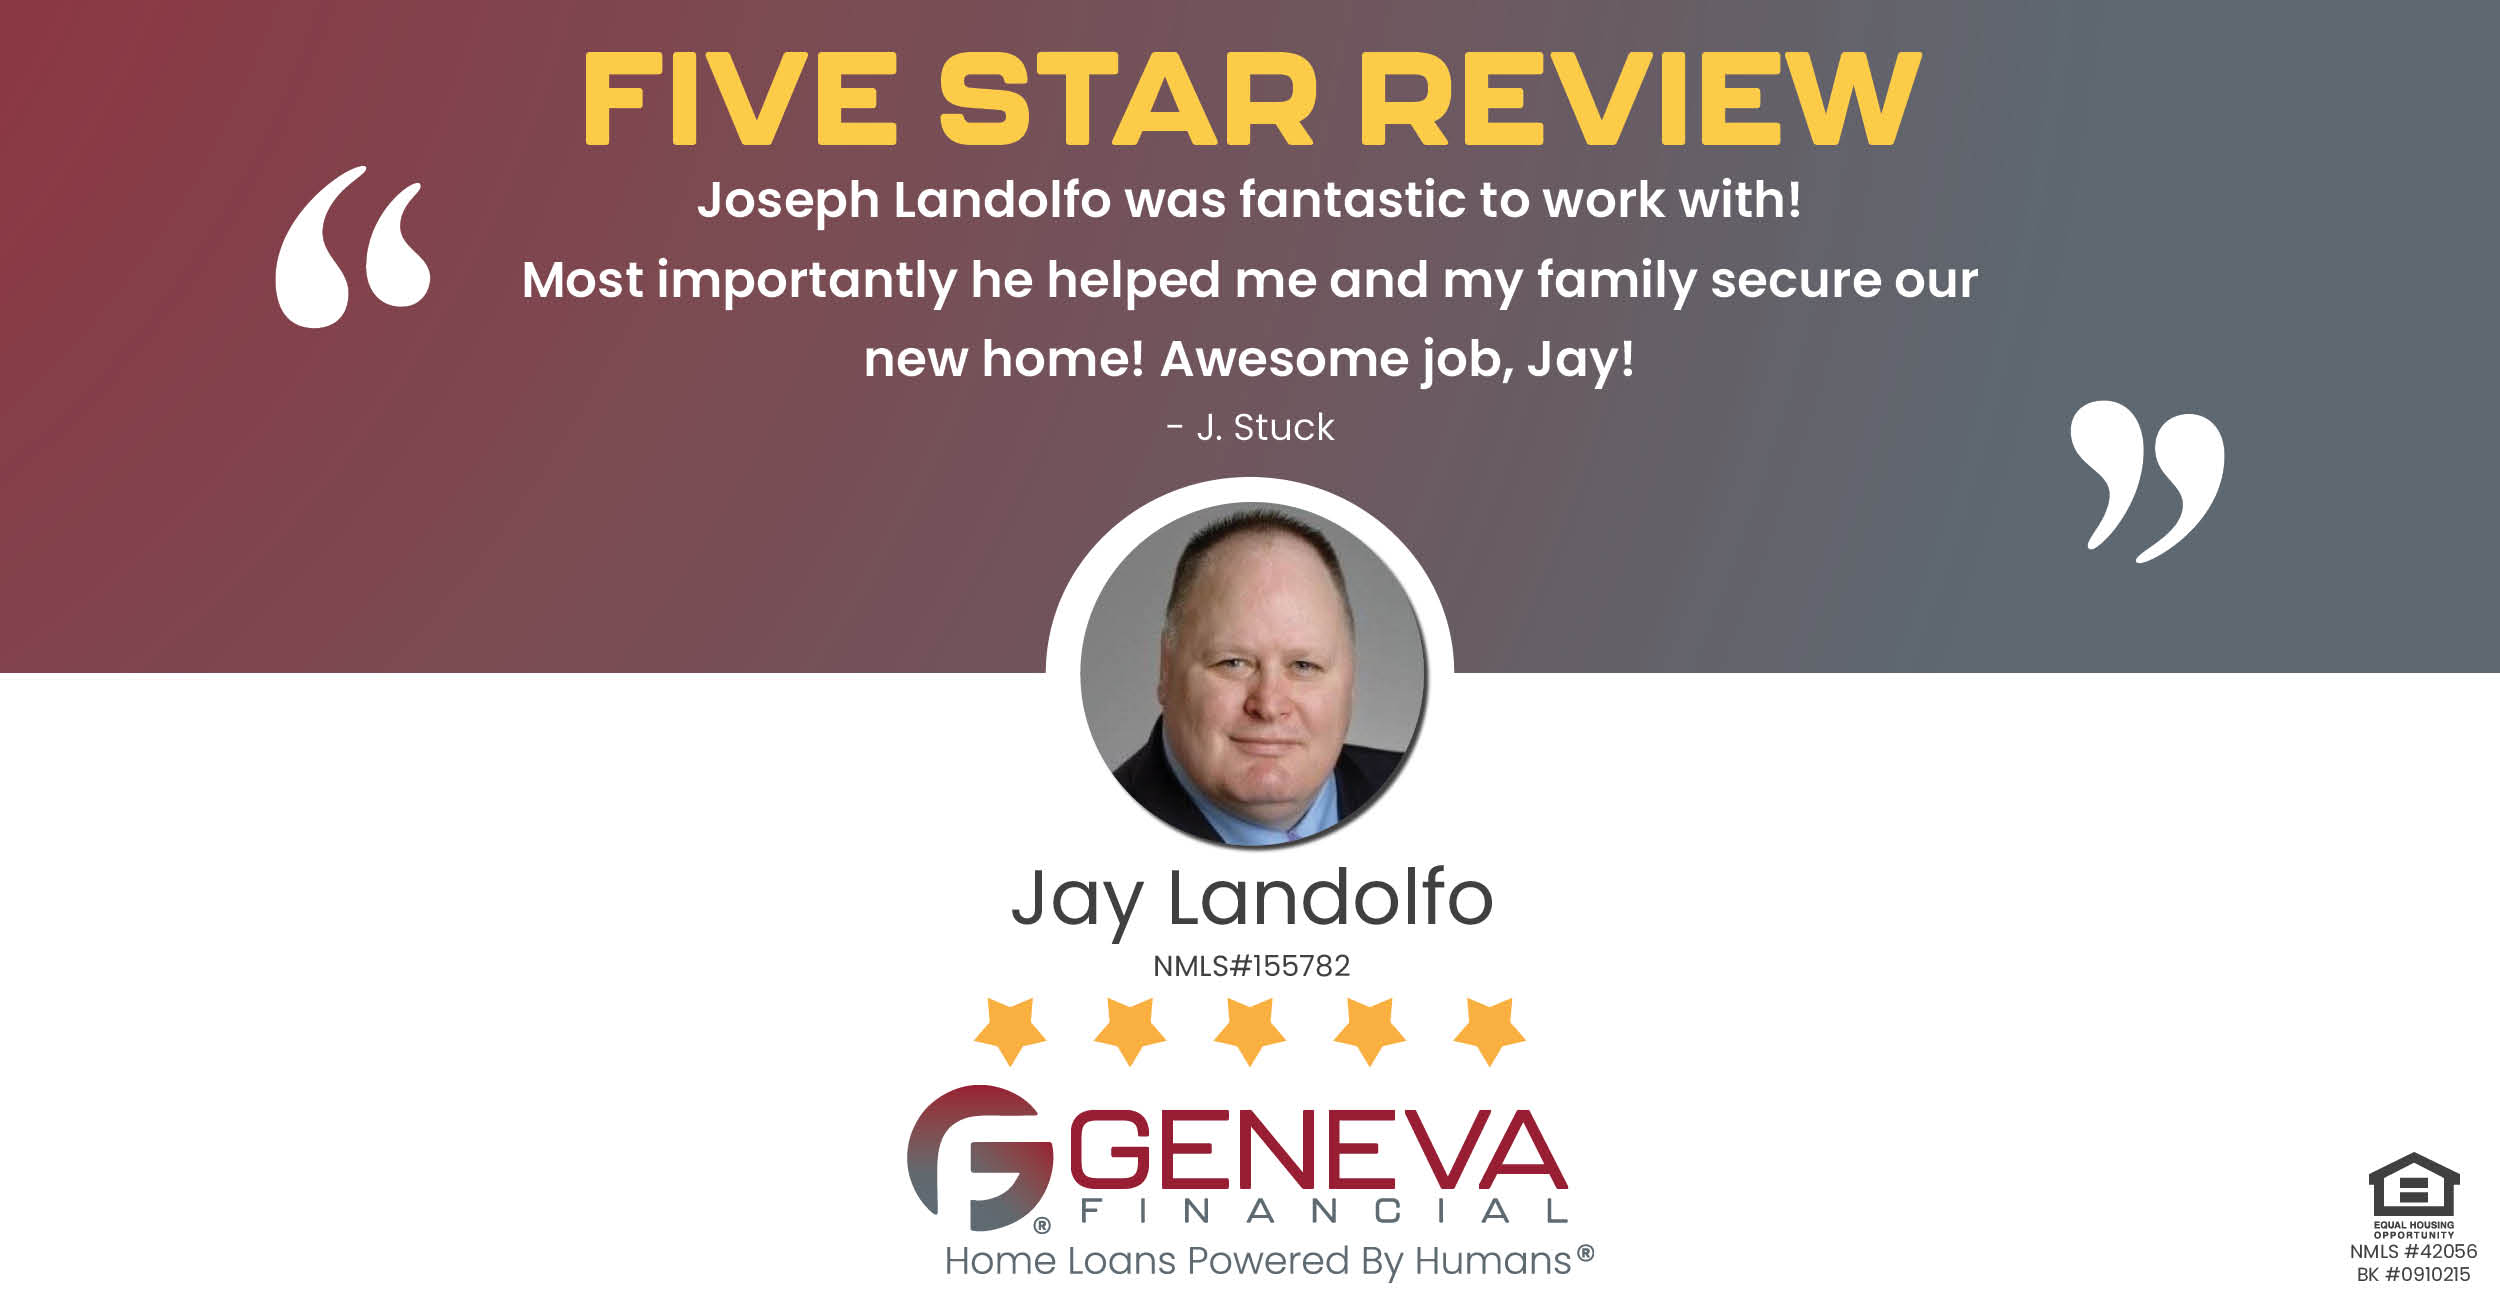 5 Star Review for Jay Landolfo, Licensed Mortgage Branch Manager with Geneva Financial, Westerville, Ohio – Home Loans Powered by Humans®.